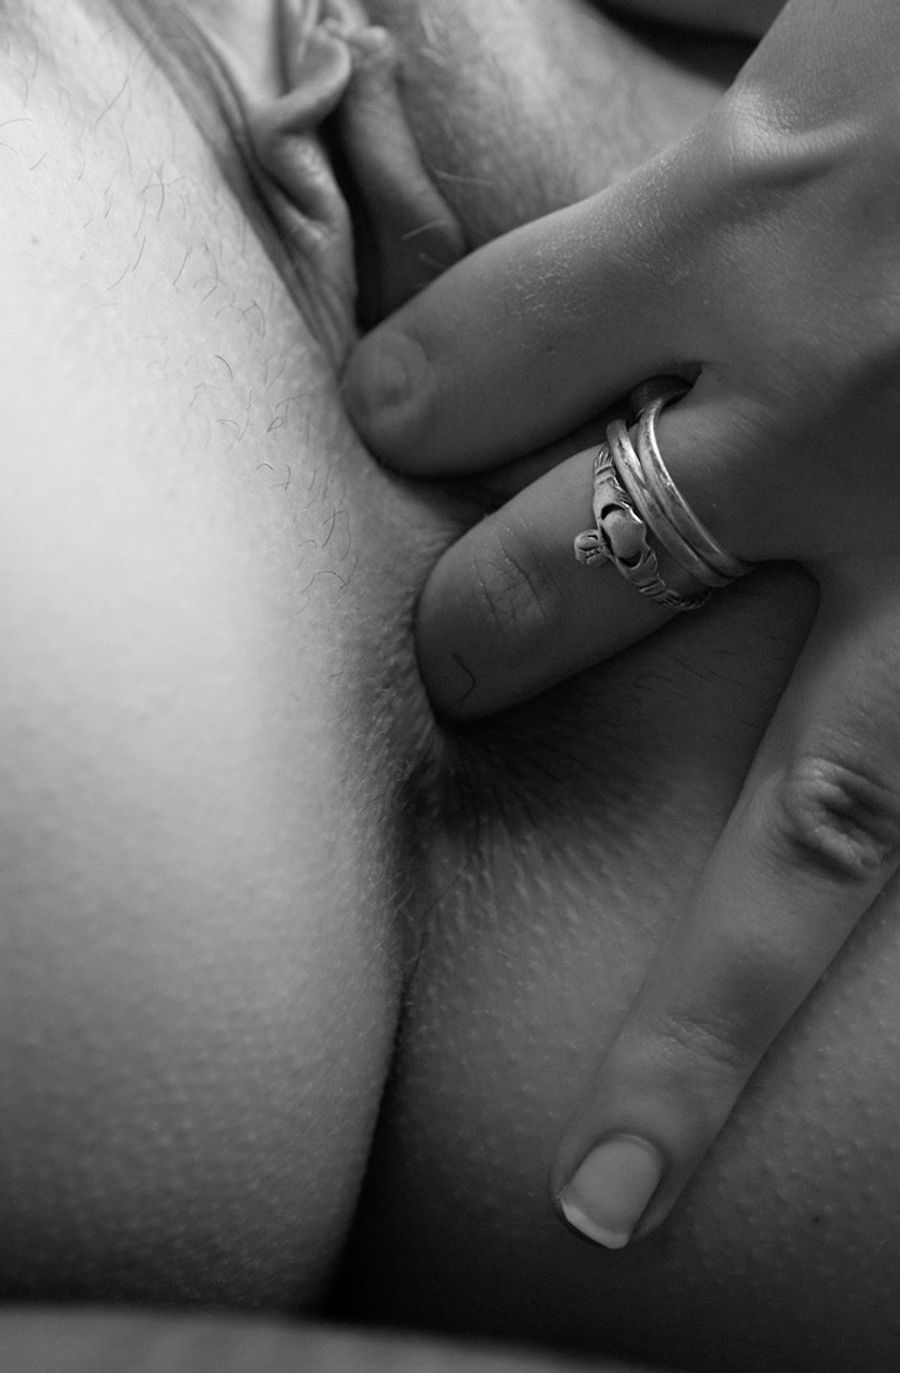 White And Black Hd - Black On White Xxx | Sex Pictures Pass